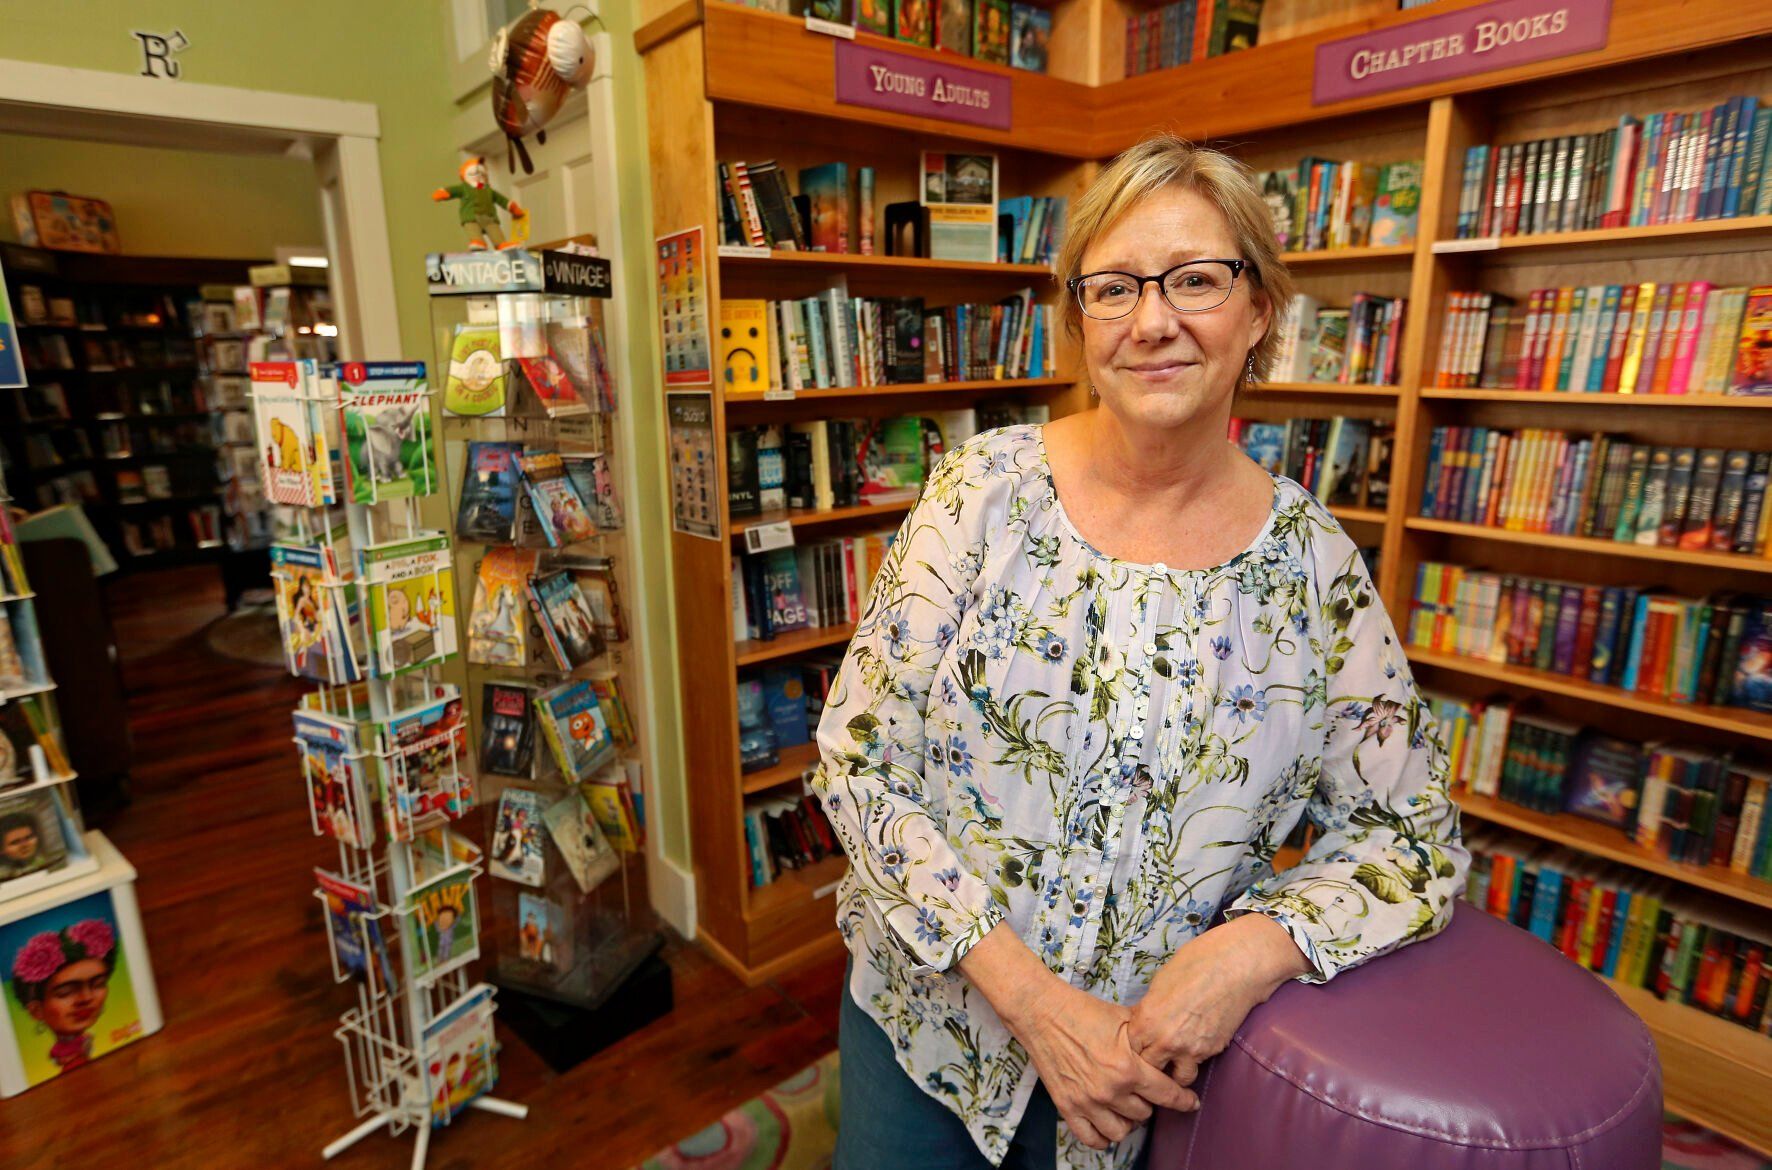 Sue Davis is the owner of River Lights Bookstore in Dubuque.     PHOTO CREDIT: Telegraph Herald file